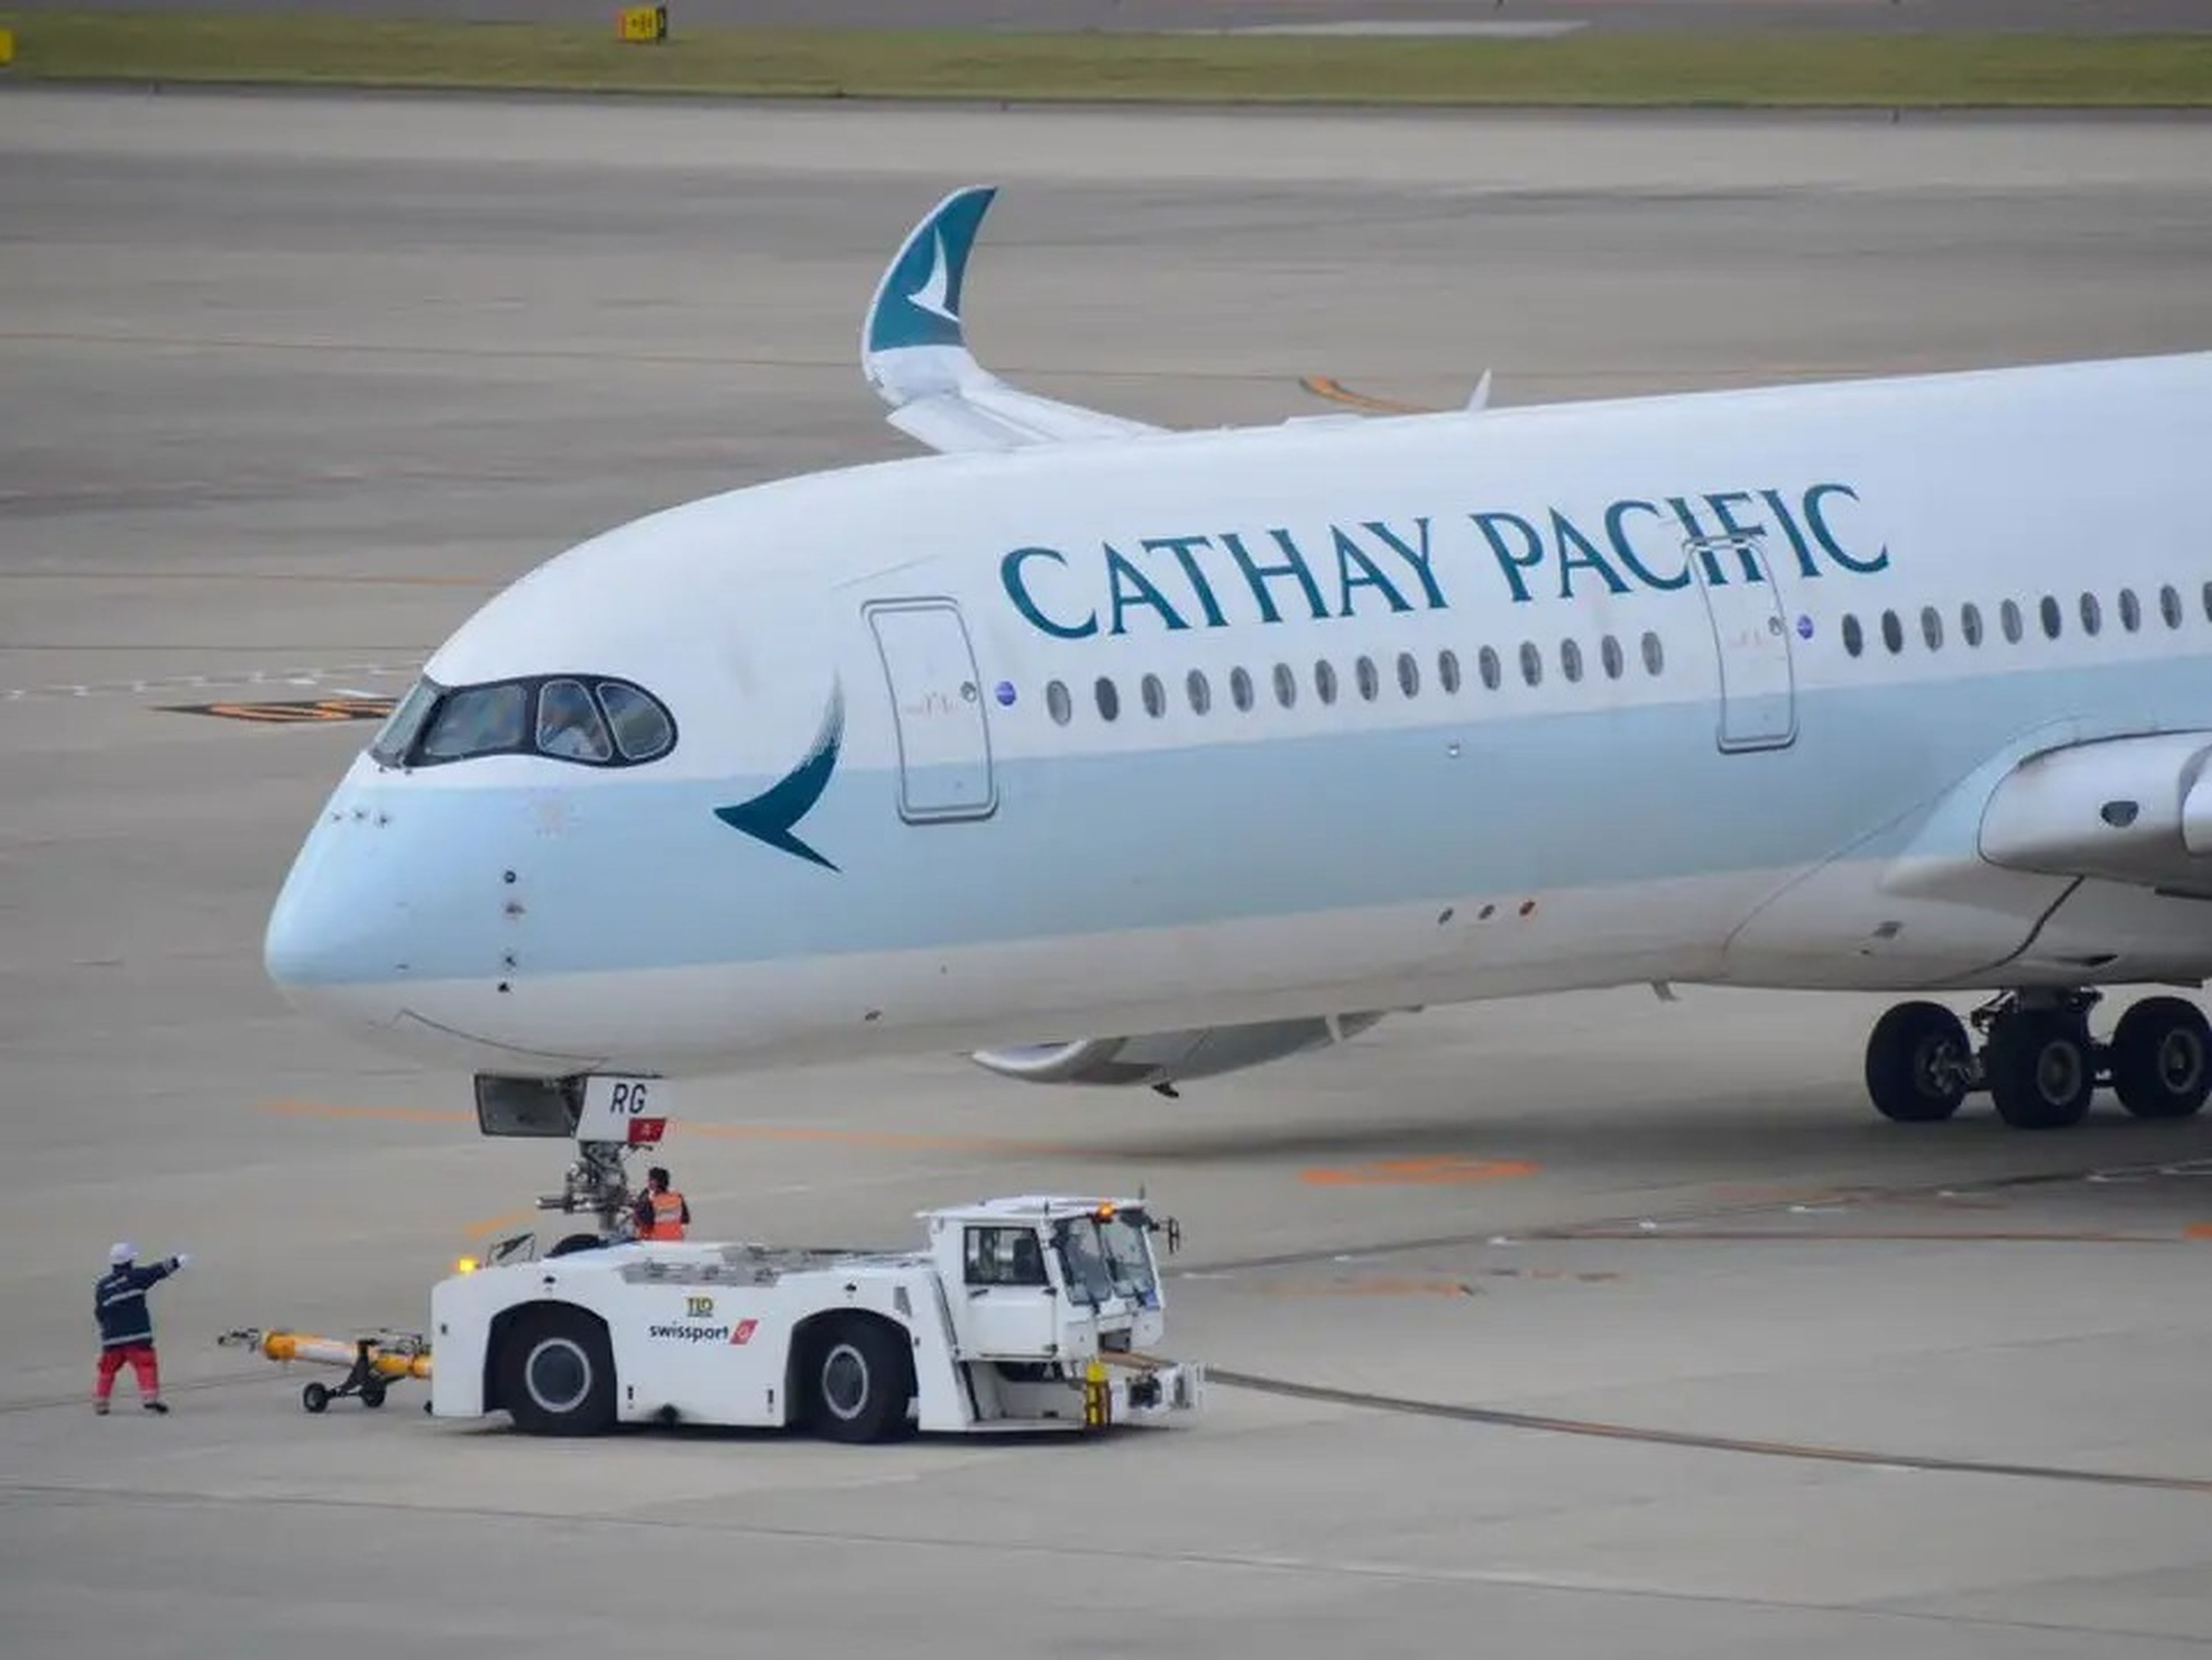 Cathay Pacific.